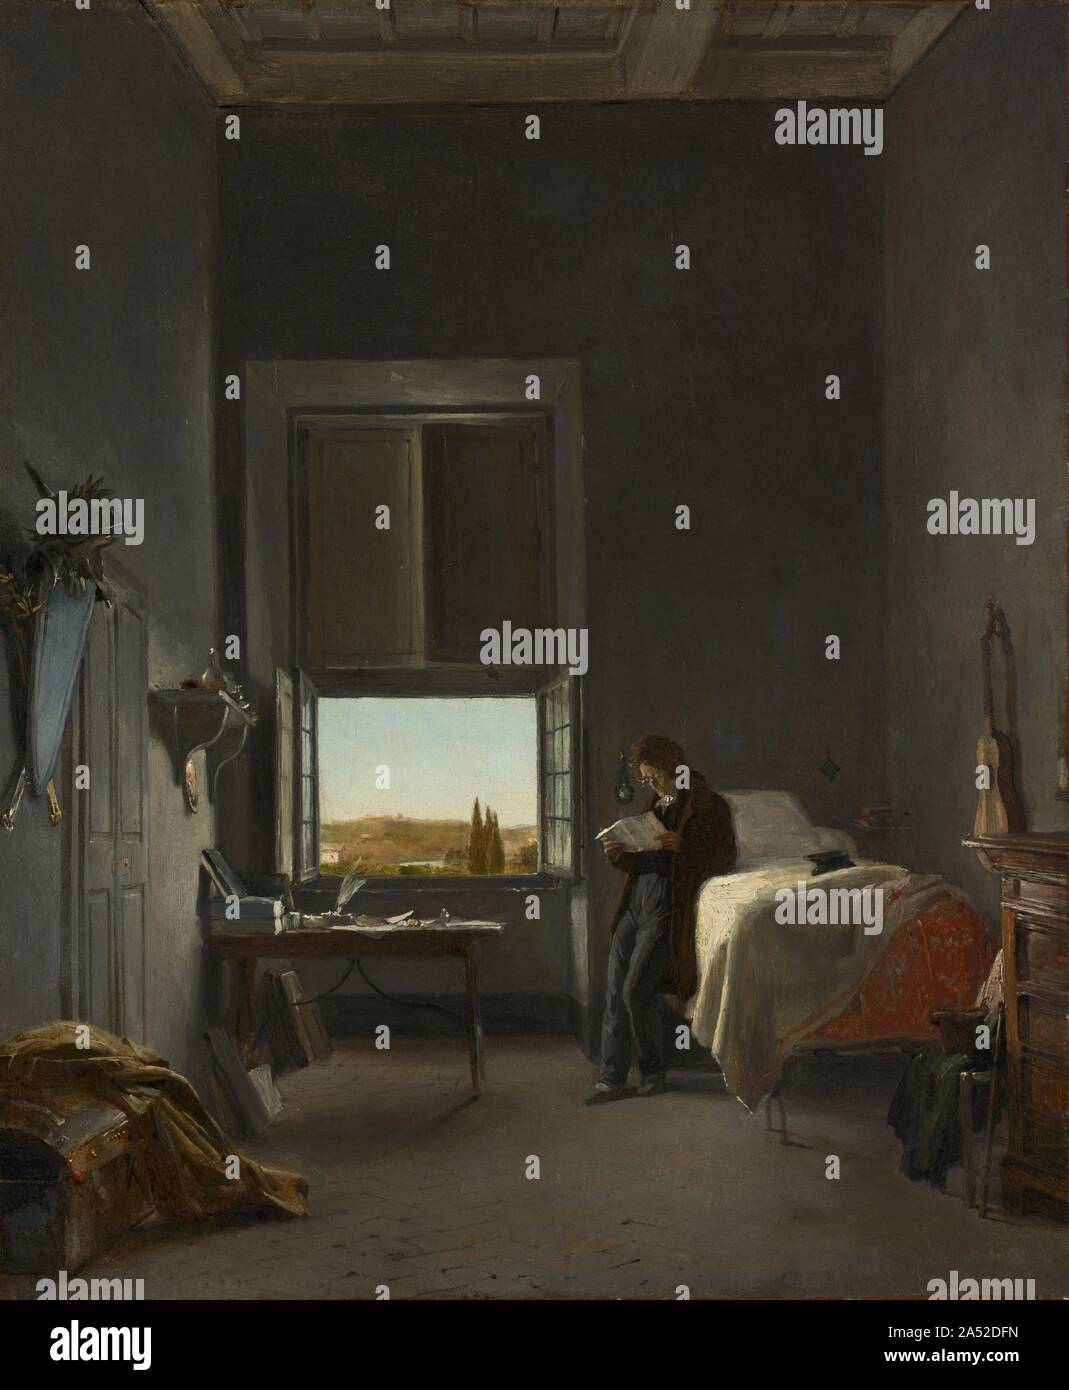 The Artist in His Room at the Villa Medici, Rome, 1817. In 1817, Cogniet won the Prix de Rome for history painting, a state prize that allowed him to live and work at the Villa Medici for a period of five years. The helmet, shield, and swords depicted on the left wall near the doors that lead to the studio refer to the expectation that Cogniet would produce a history painting each year to send back to Paris for review. On the back of this painting the artist wrote (in French): &quot;My room at the reception of my first letter from my family, 1817.&quot; The open window with the landscape view Stock Photo